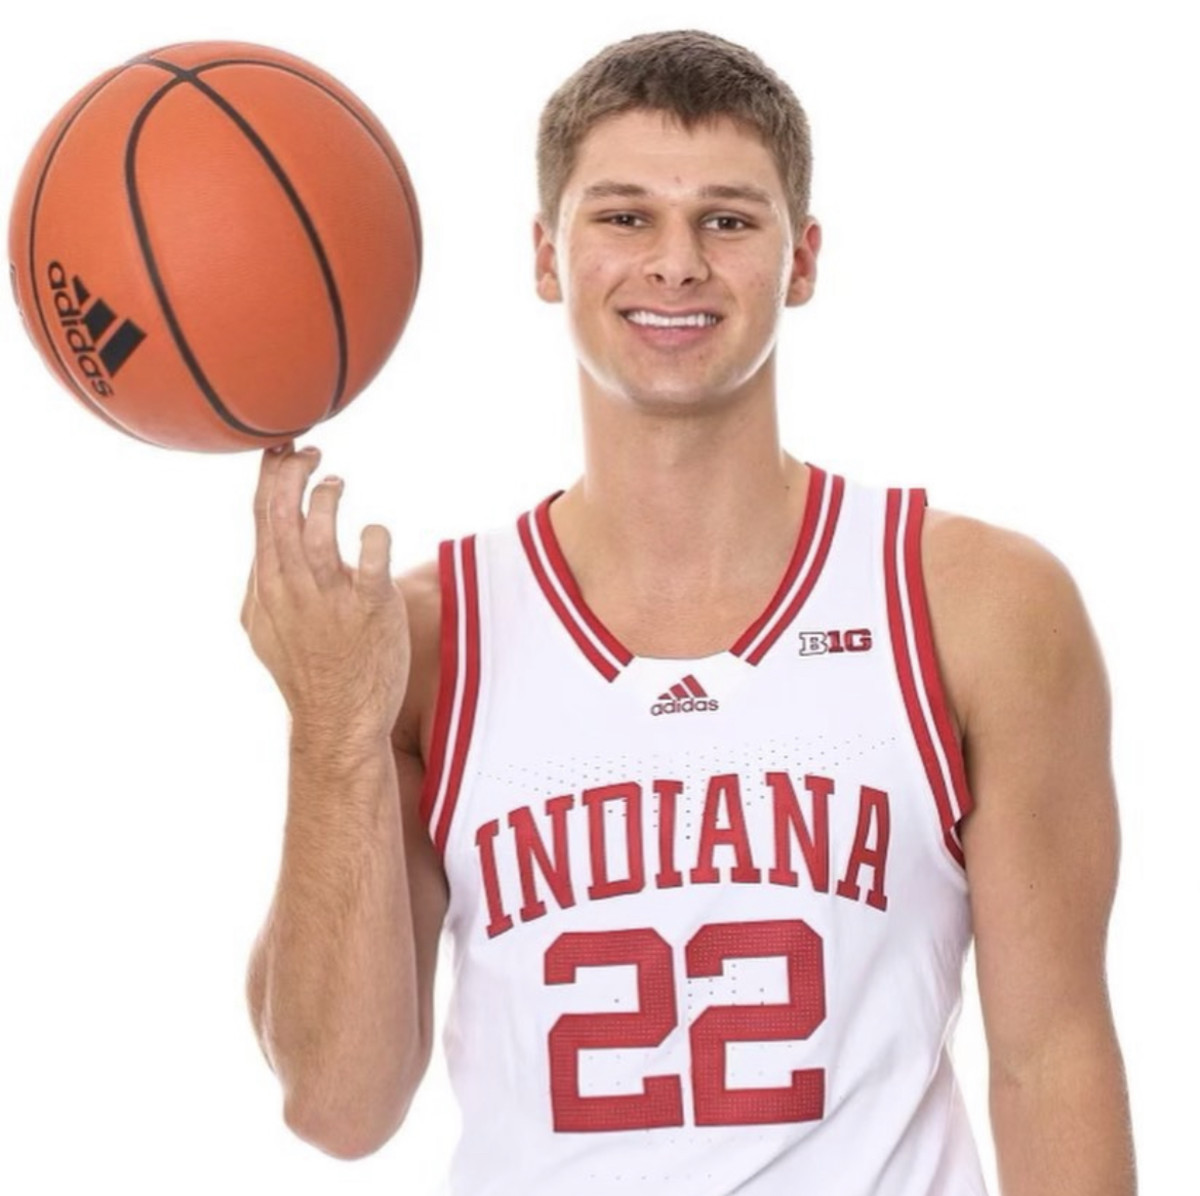 Indiana guard Jackson Creel pictured in No. 22 jersey.